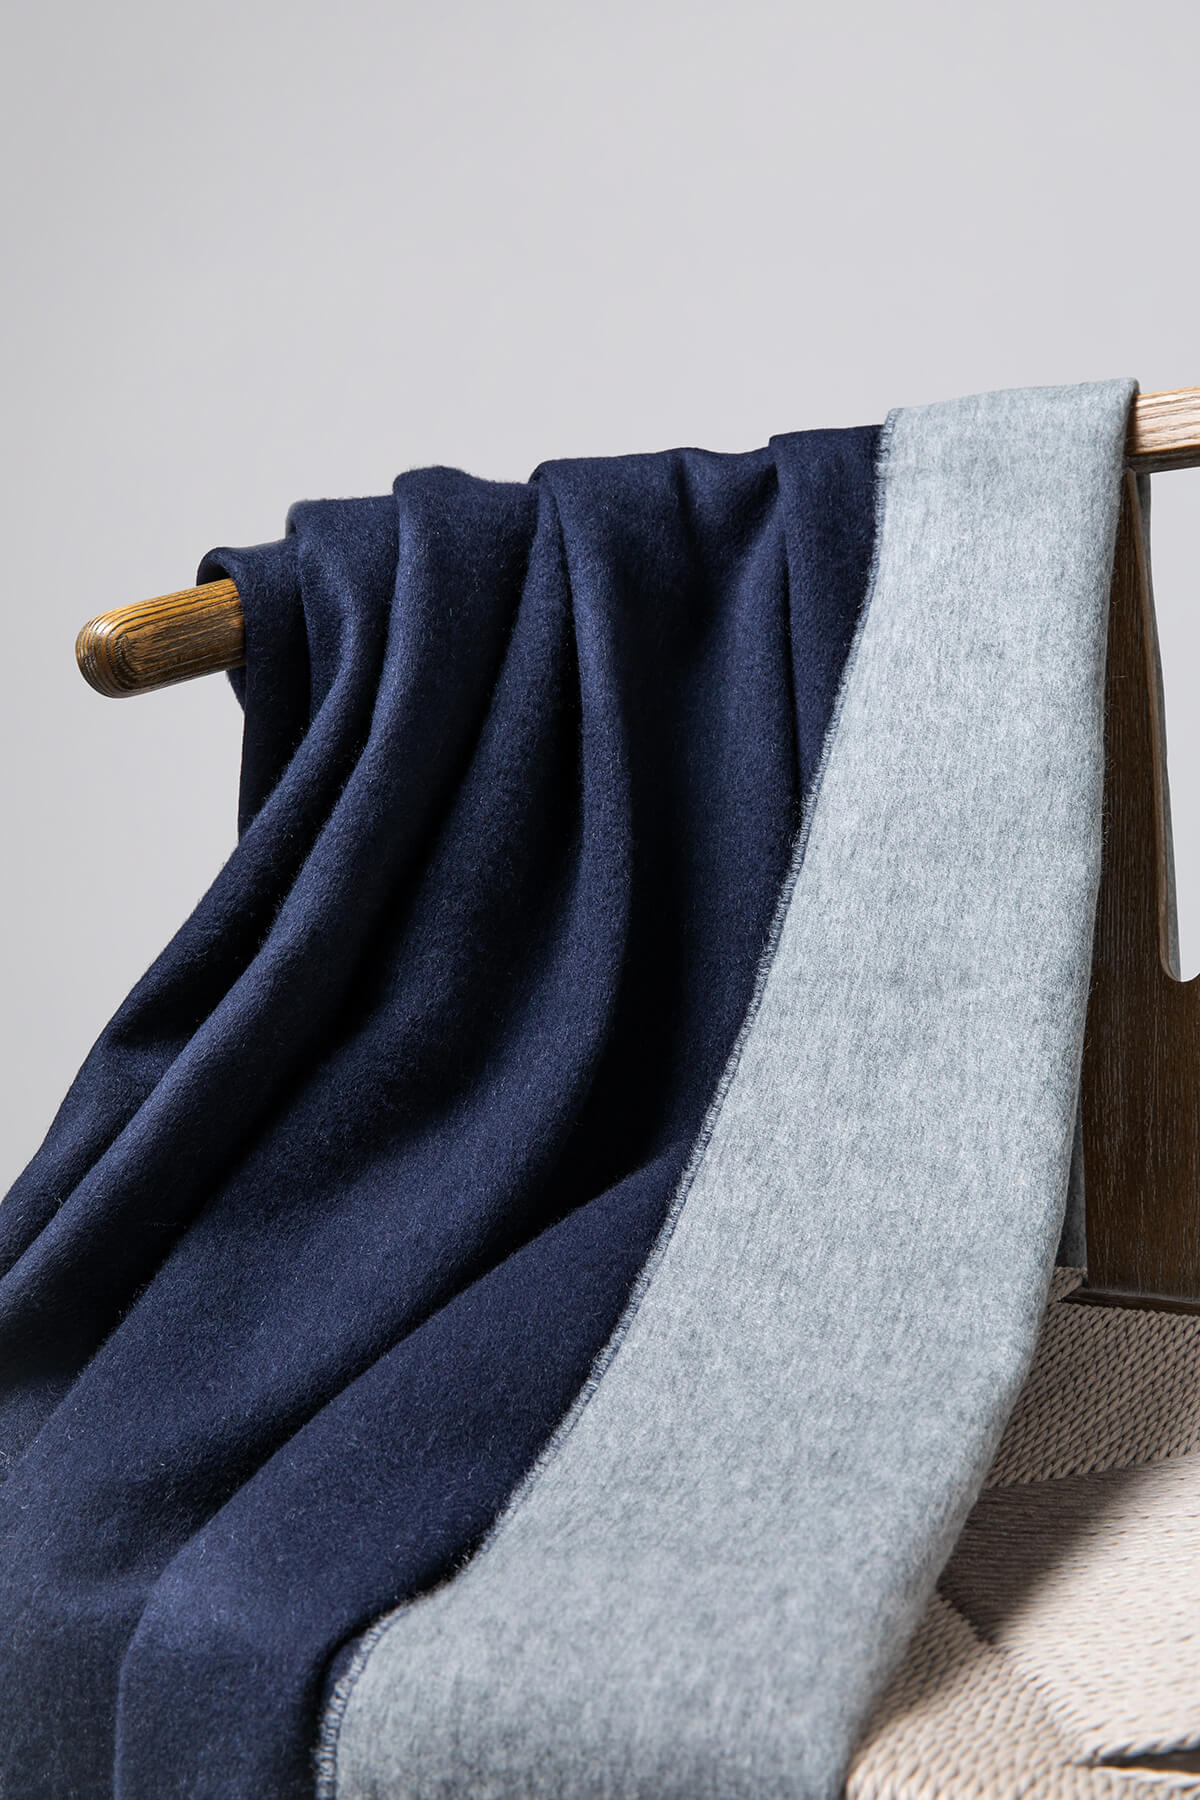 Close up of Johnstons of Elgin Reversible Pure Cashmere Throw in Navy & Light Grey draped over a wooden chair on a white background WA000013RU6632ONE